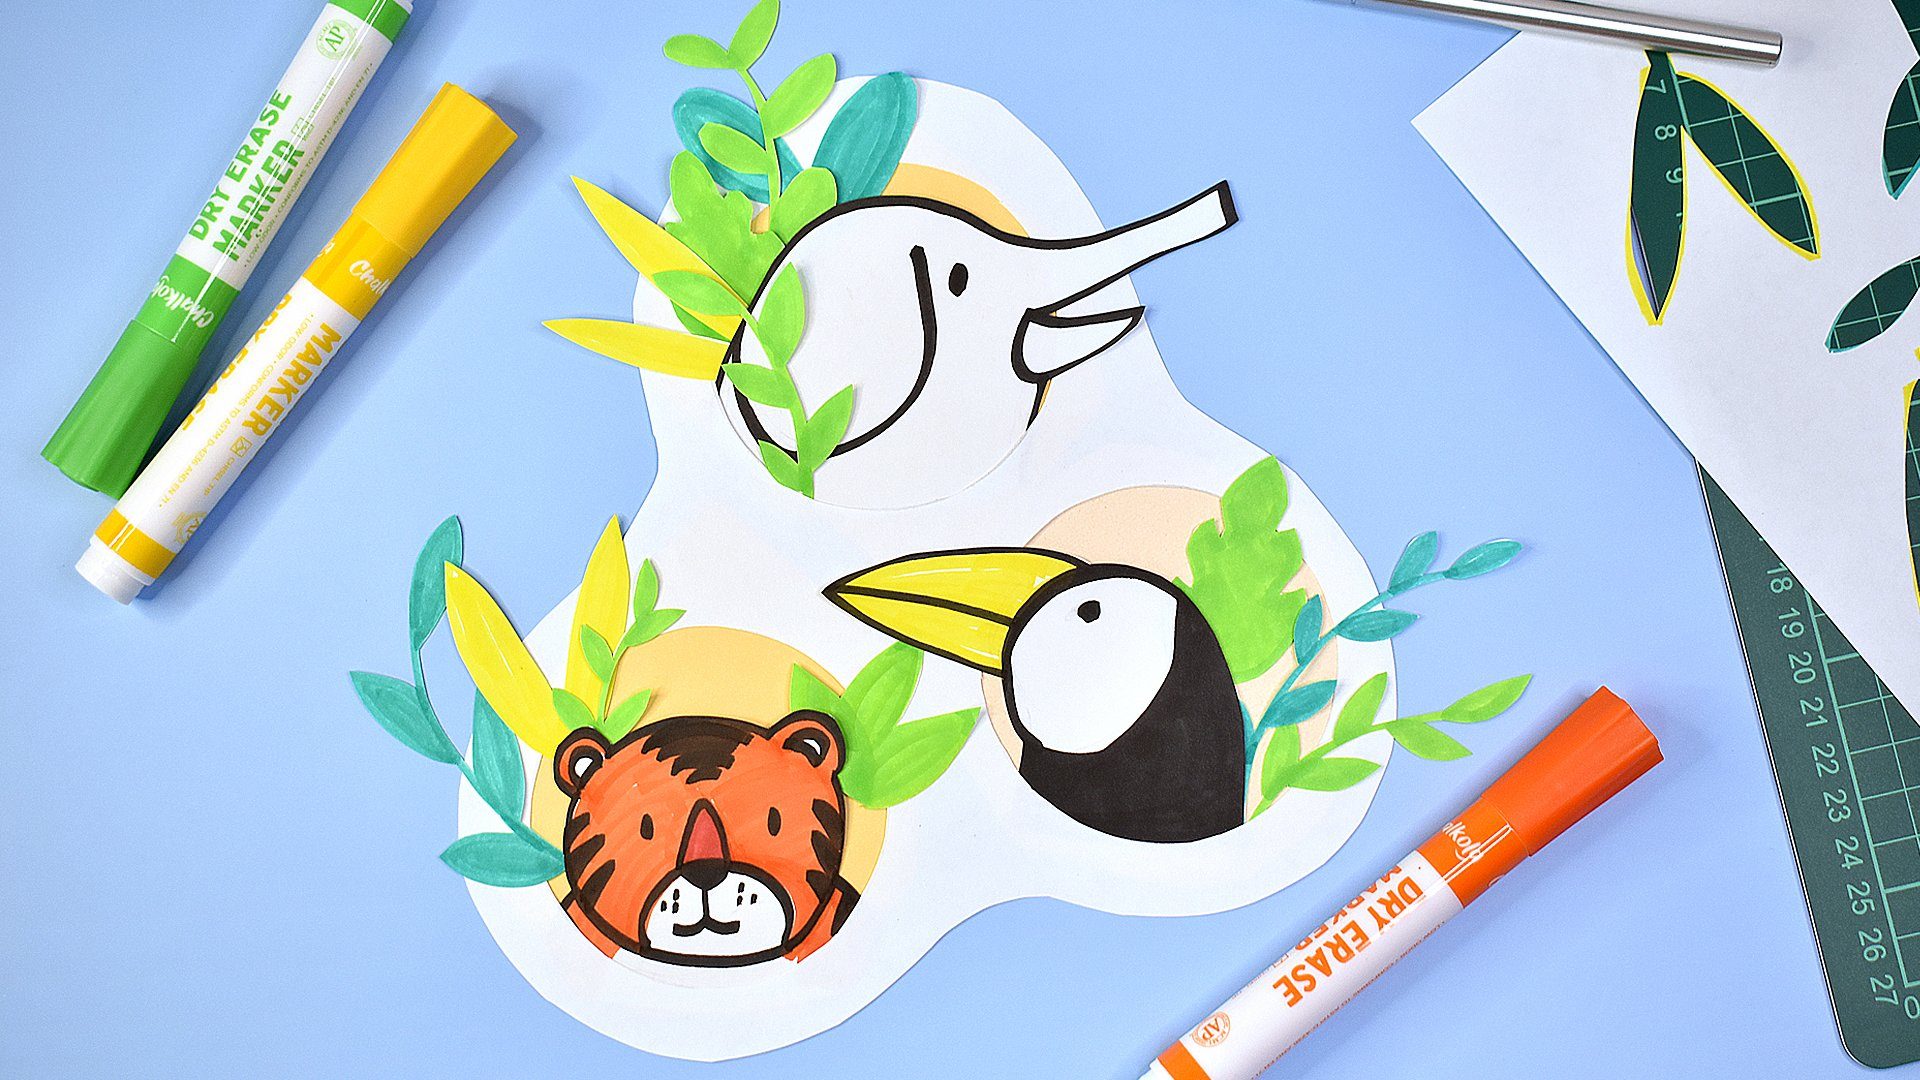 ARTIVITY: DIY Animal Cutouts with Dry Erase Markers